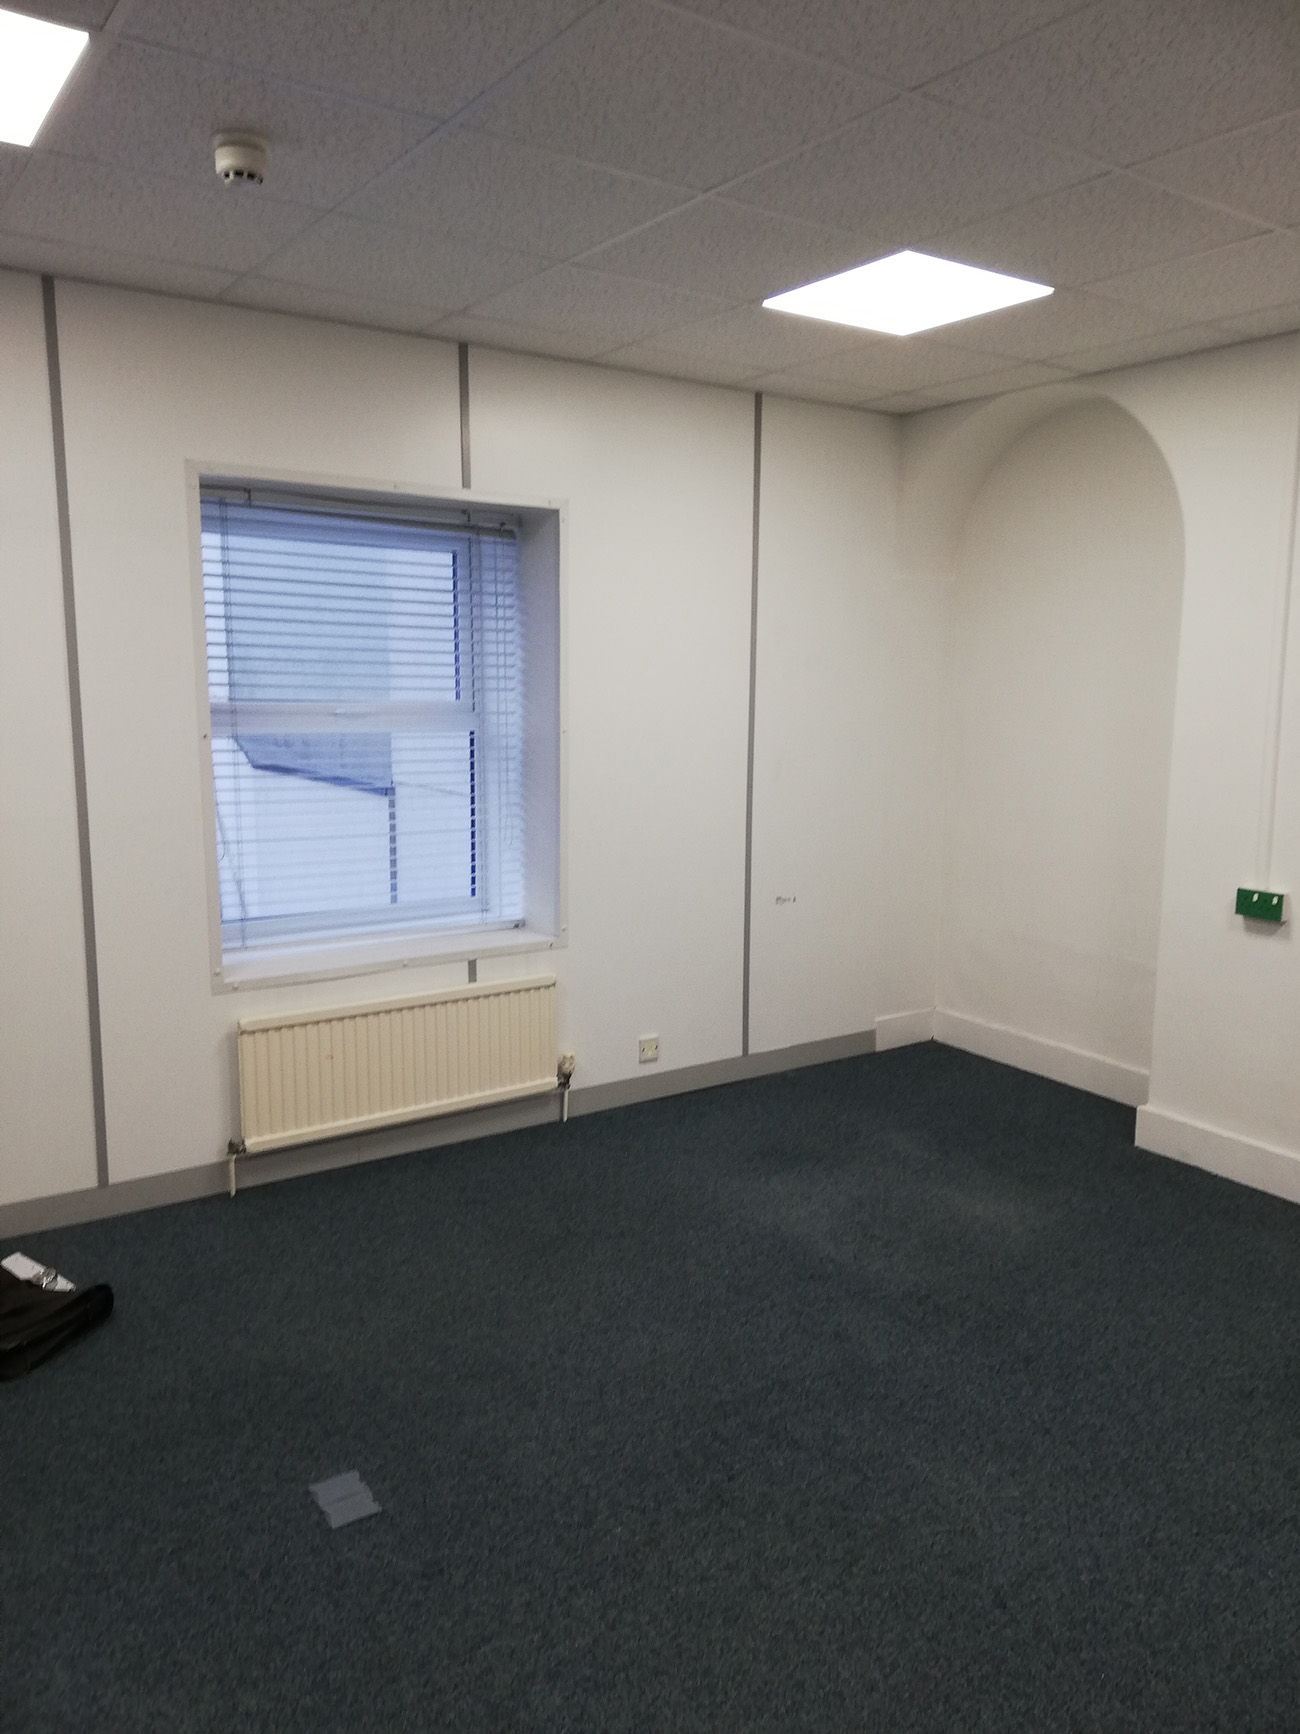 A photo of the office before it was decorated showing the windows and one of the alcoves.